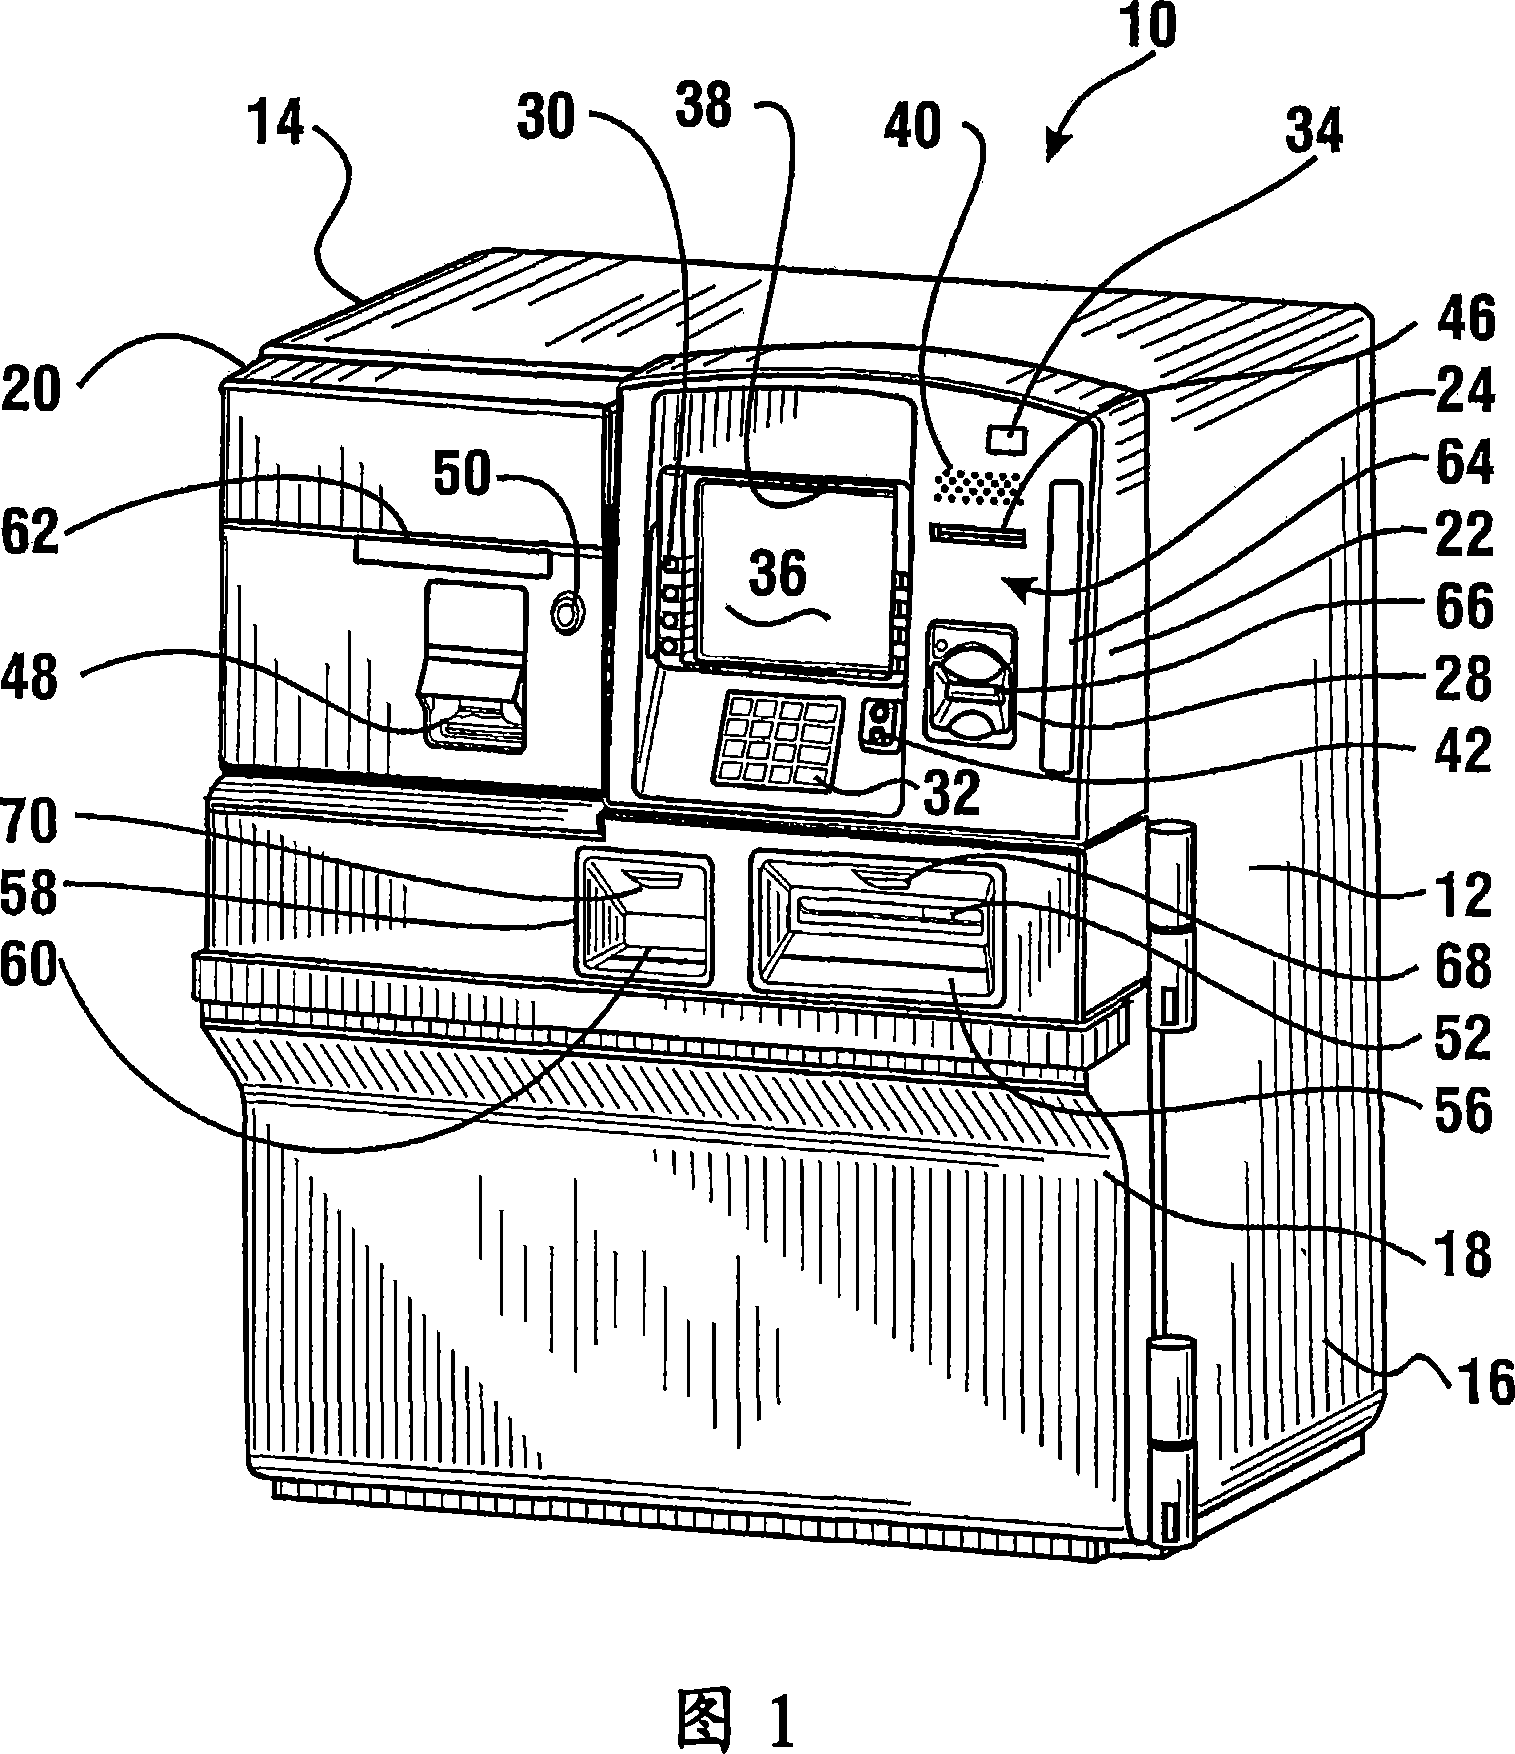 Cash dispensing automated banking machine diagostic system and method